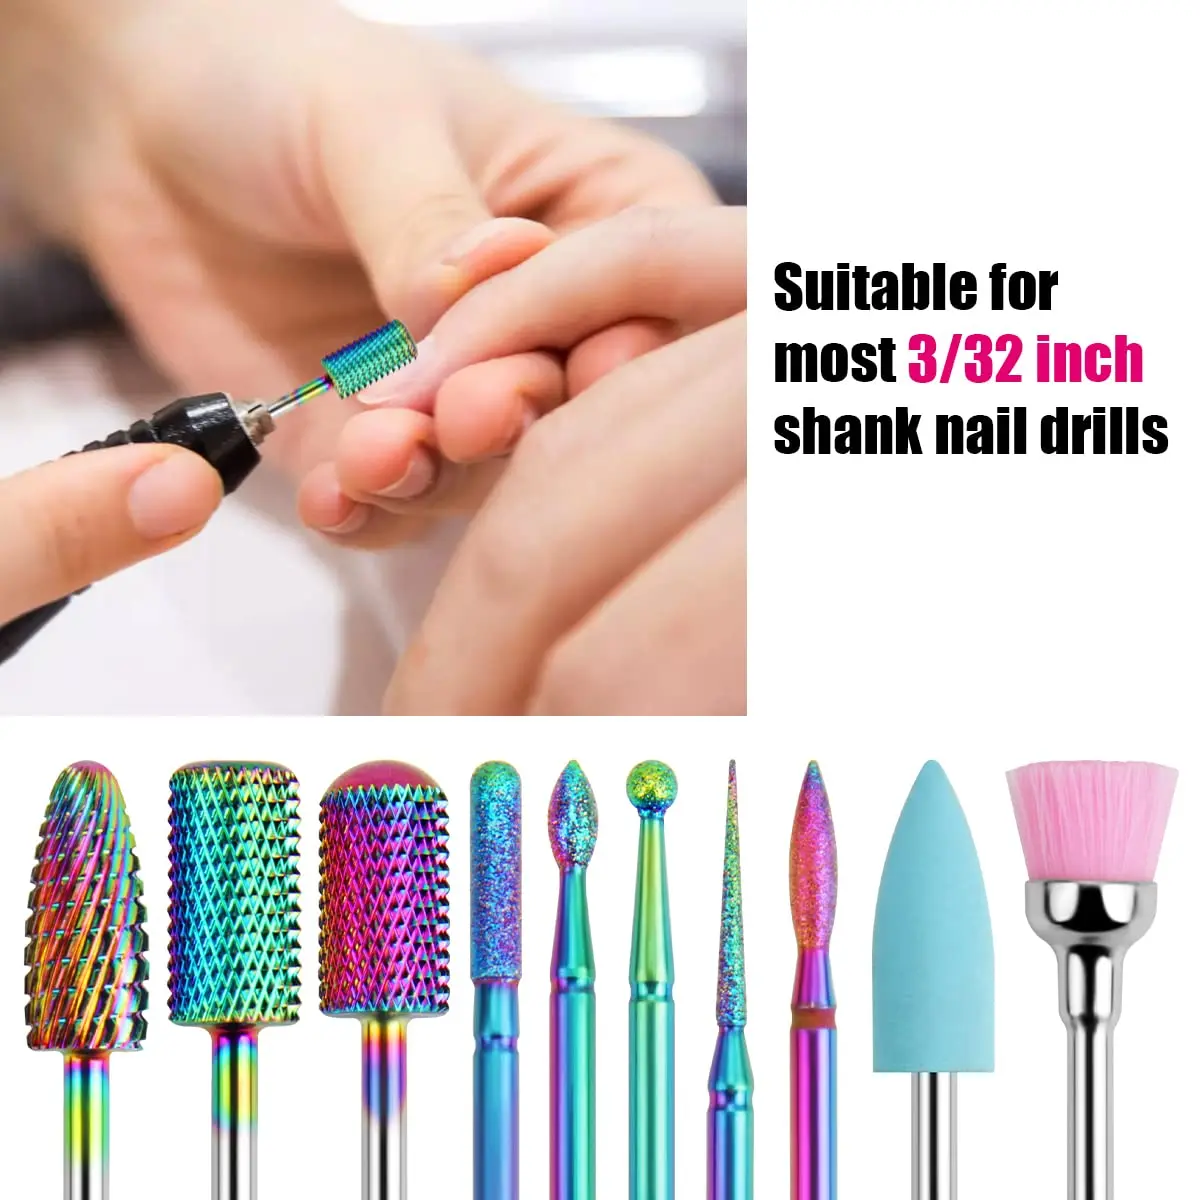 Nail Drill Bits Sets, 10pcs Professional Electric Nail Files Drill 3/32 Inches Tungsten steel Diamanten cuticle Nail Drill Tool enlarge